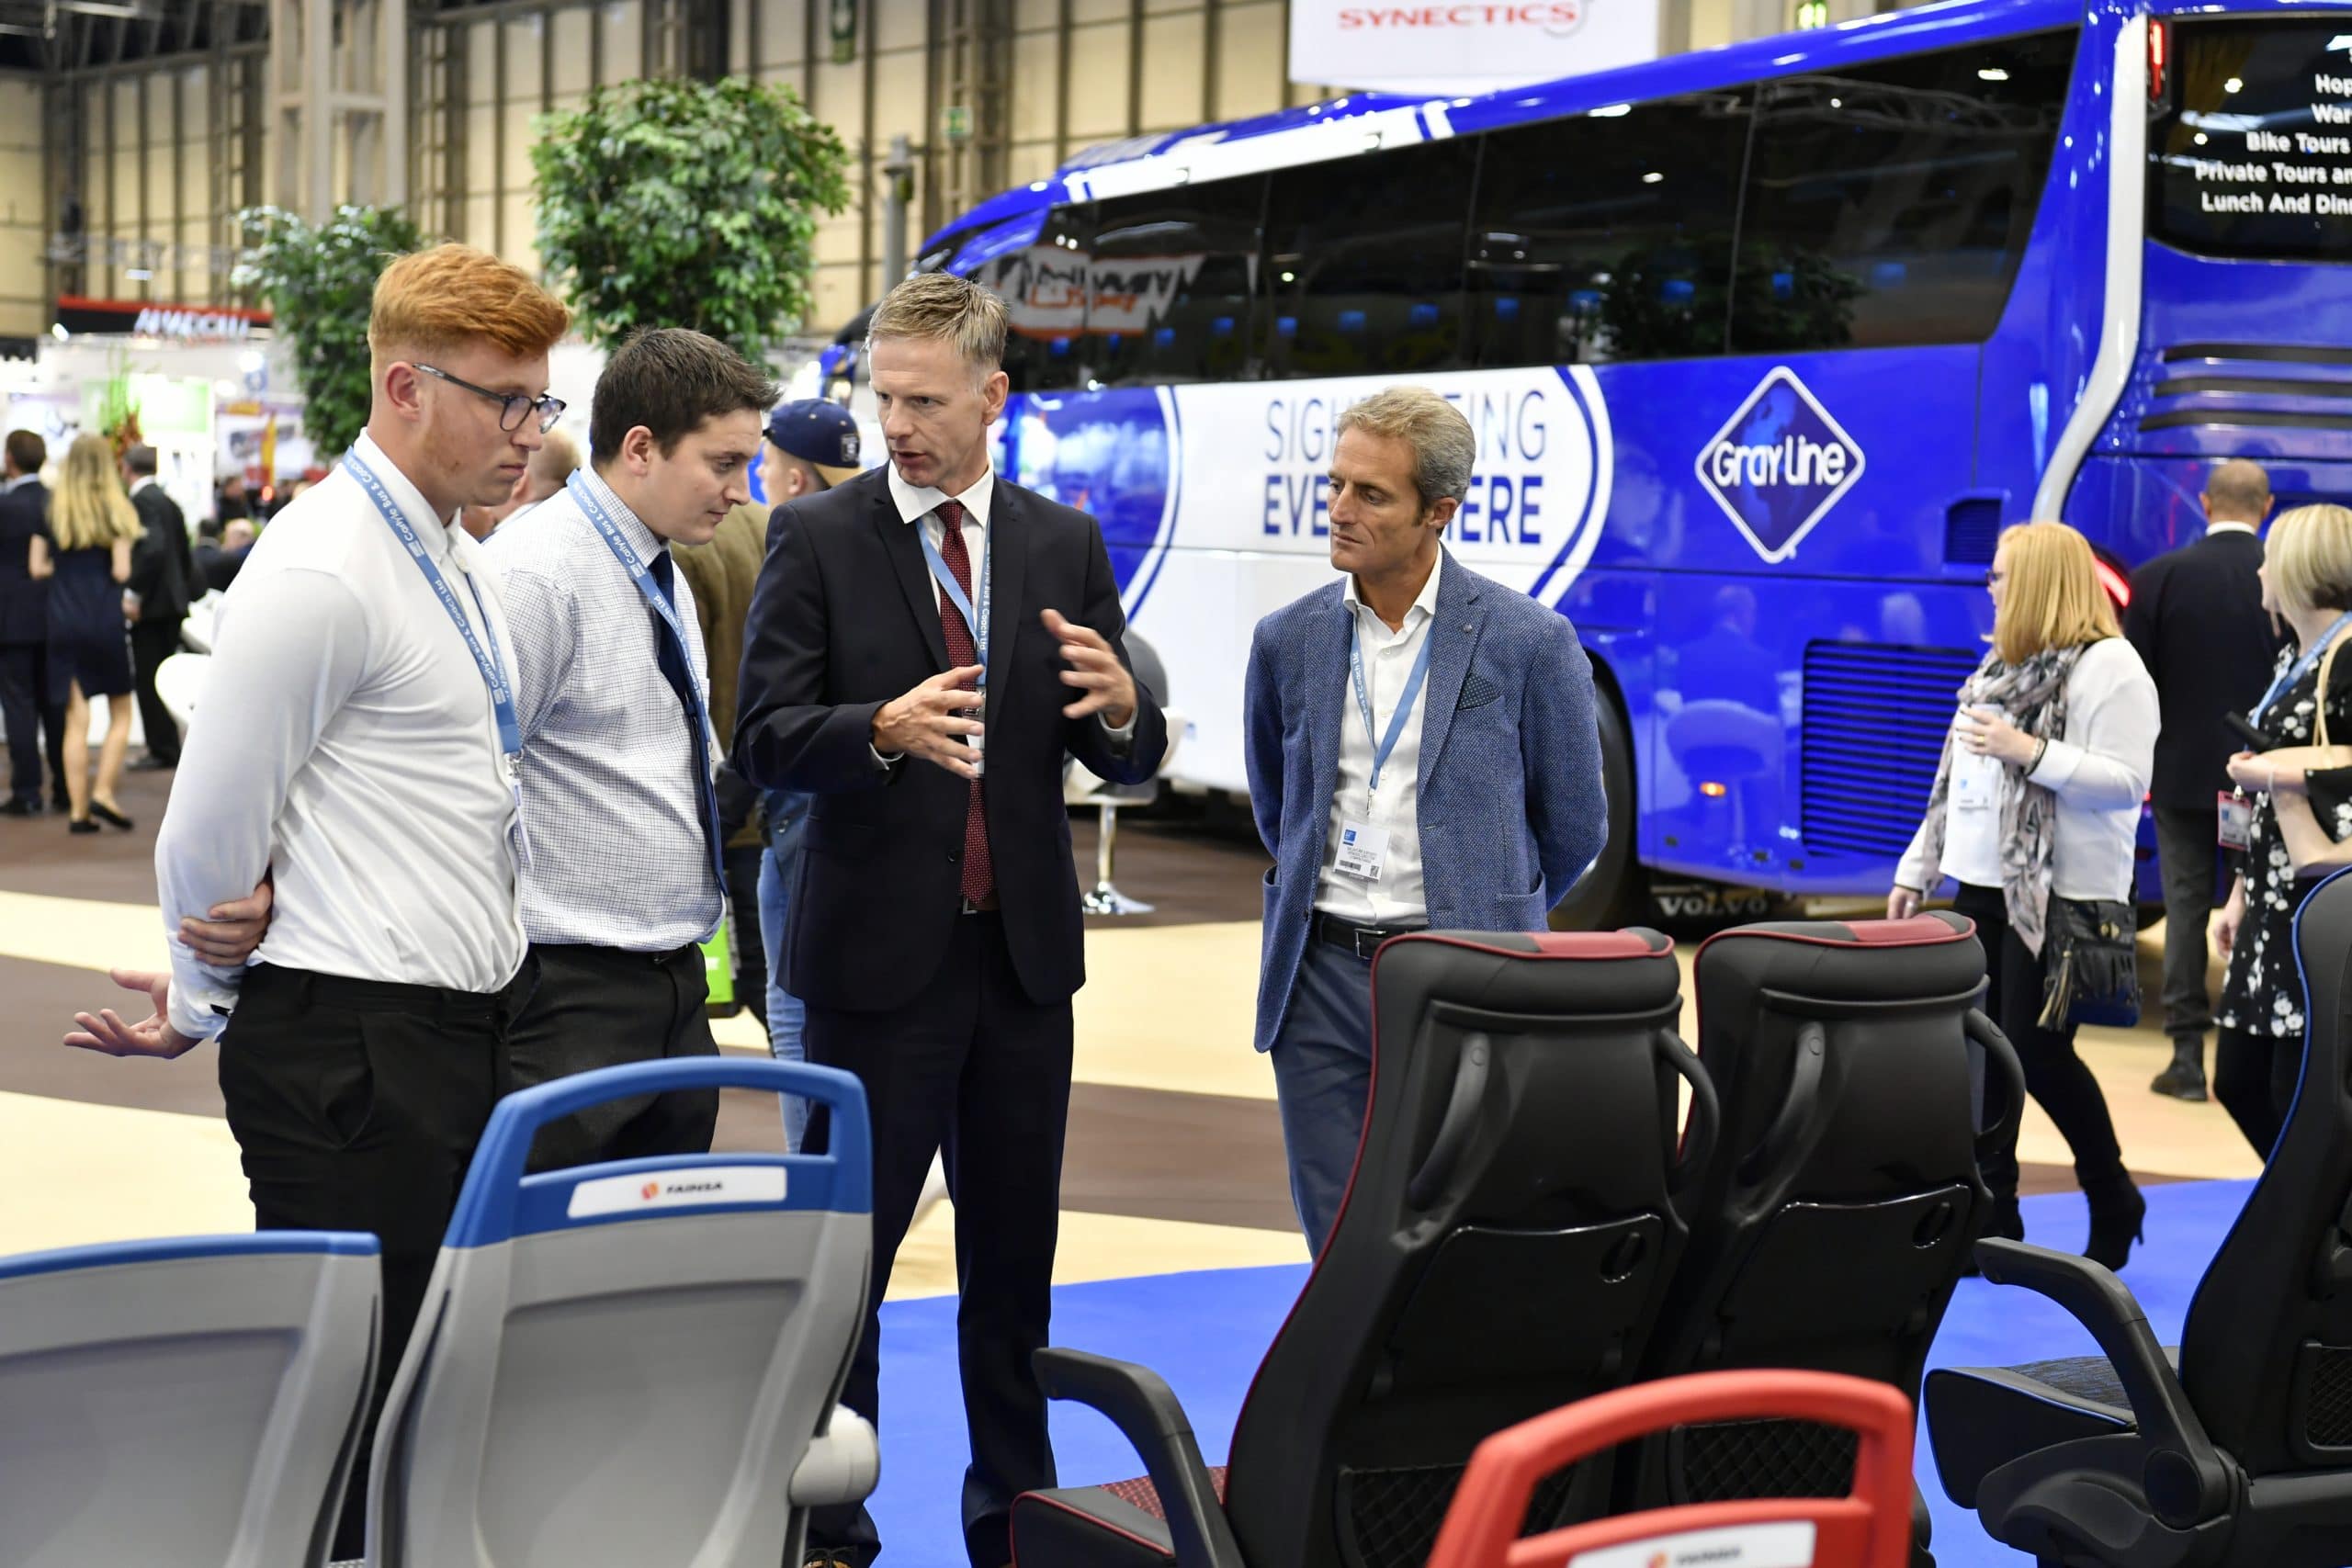 Euro Bus Expo 2022 to be held at the NEC Birmingham on 1-3 November